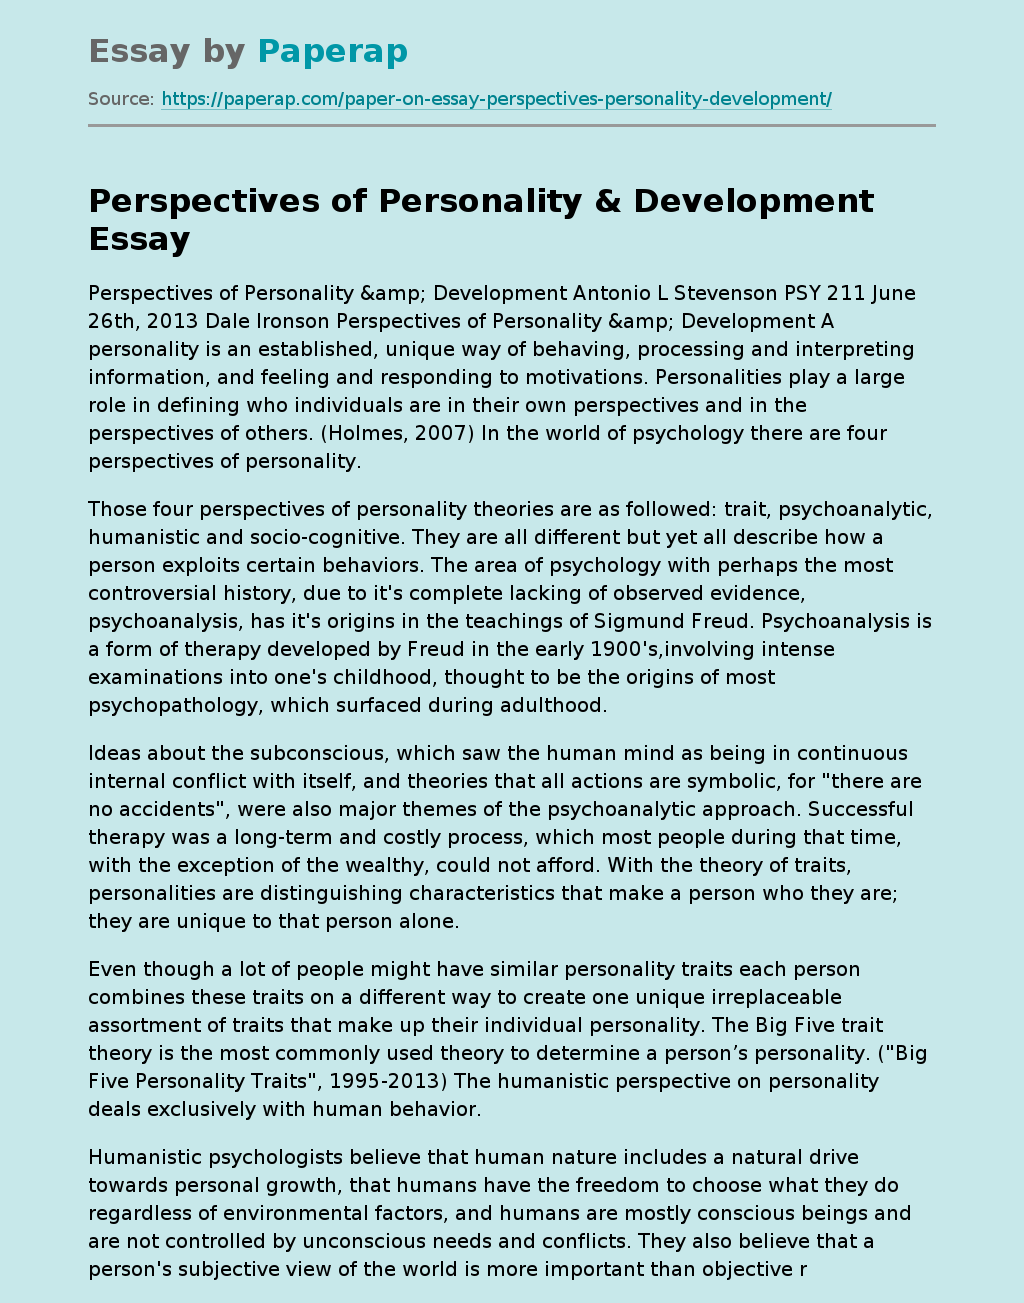 Perspectives of Personality &#038; Development